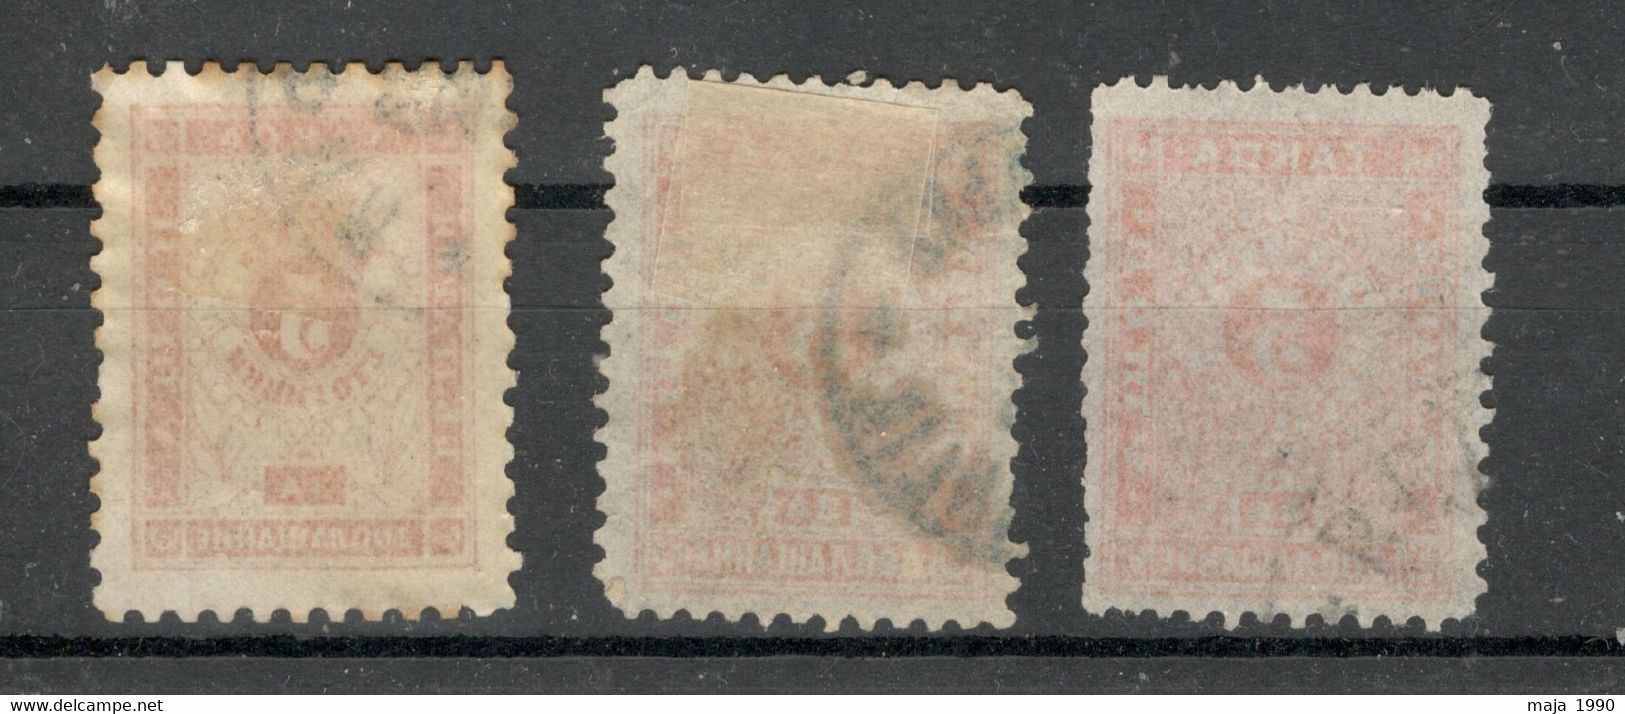 BULGARIA - 3 USED  POSTAGE DUE STAMPS, 5st - VARIETY - 1887/1895. - Strafport